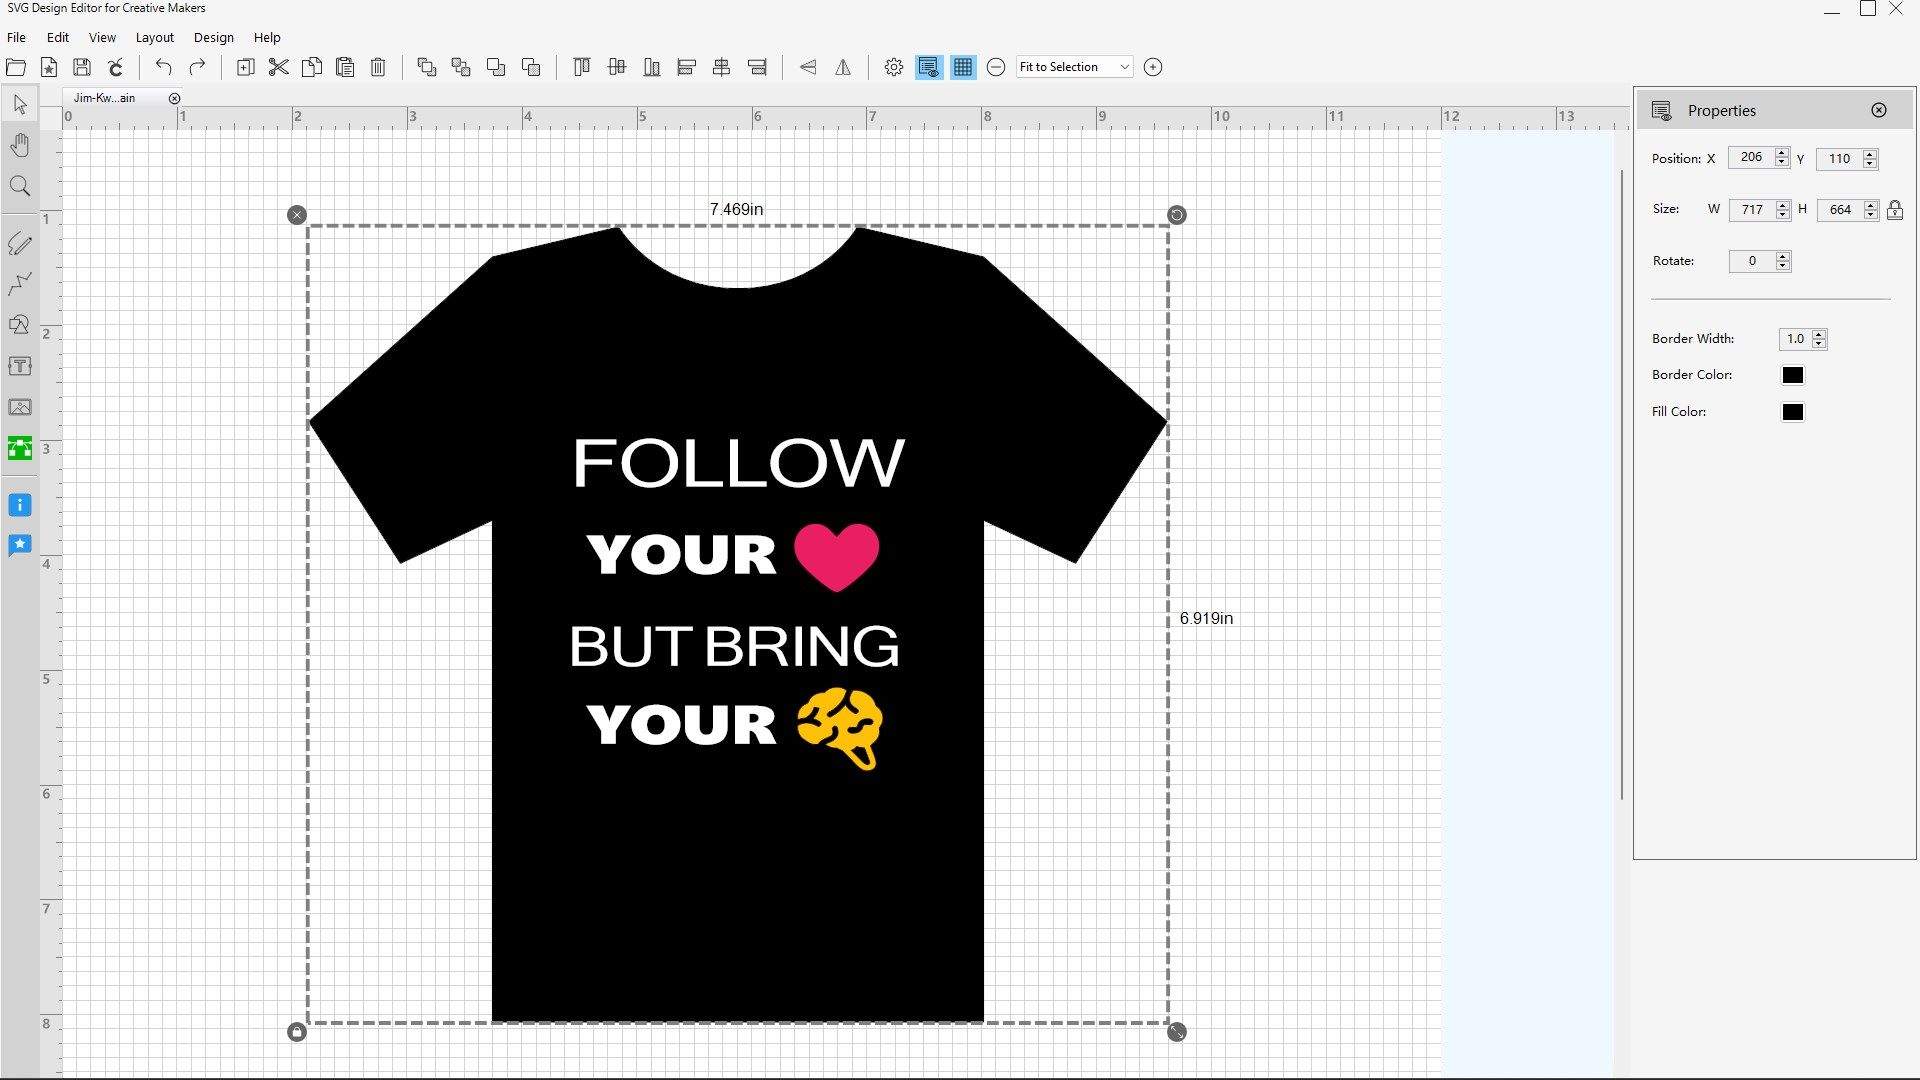 A simple yet expressive t-shirt design created from scratch using SVG Design Editor. The quote/design is by Jim Kwik.